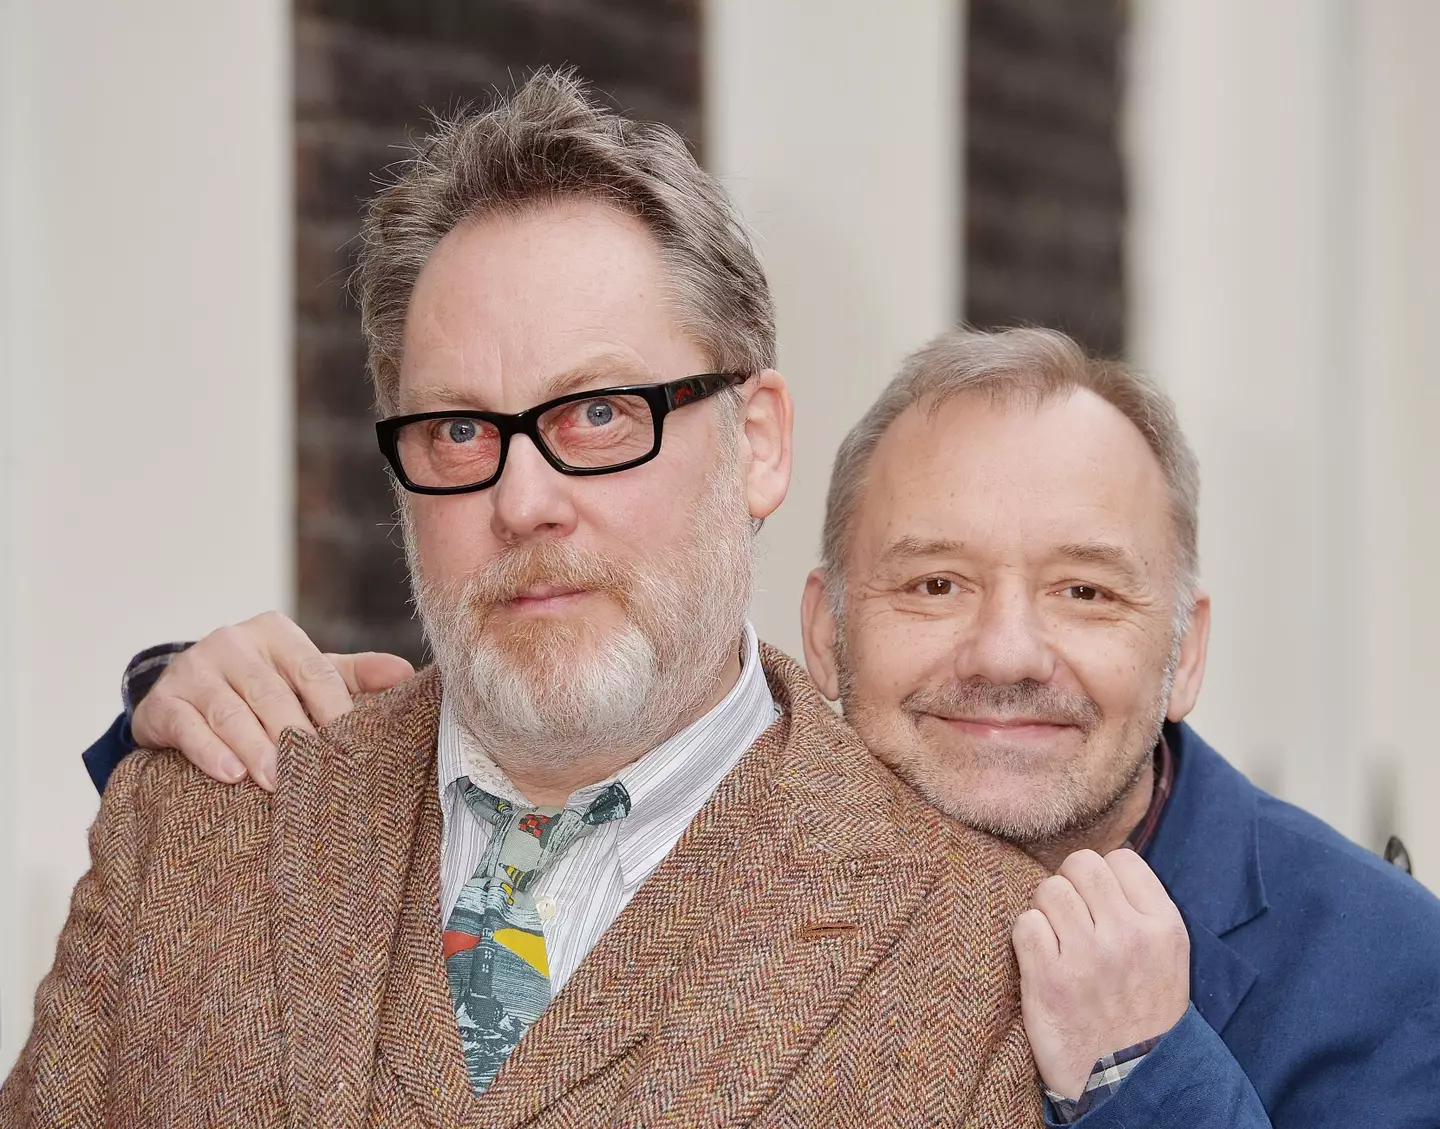 Vic Reeves and Bob Mortimer have been a much-loved comedy duo for many years.